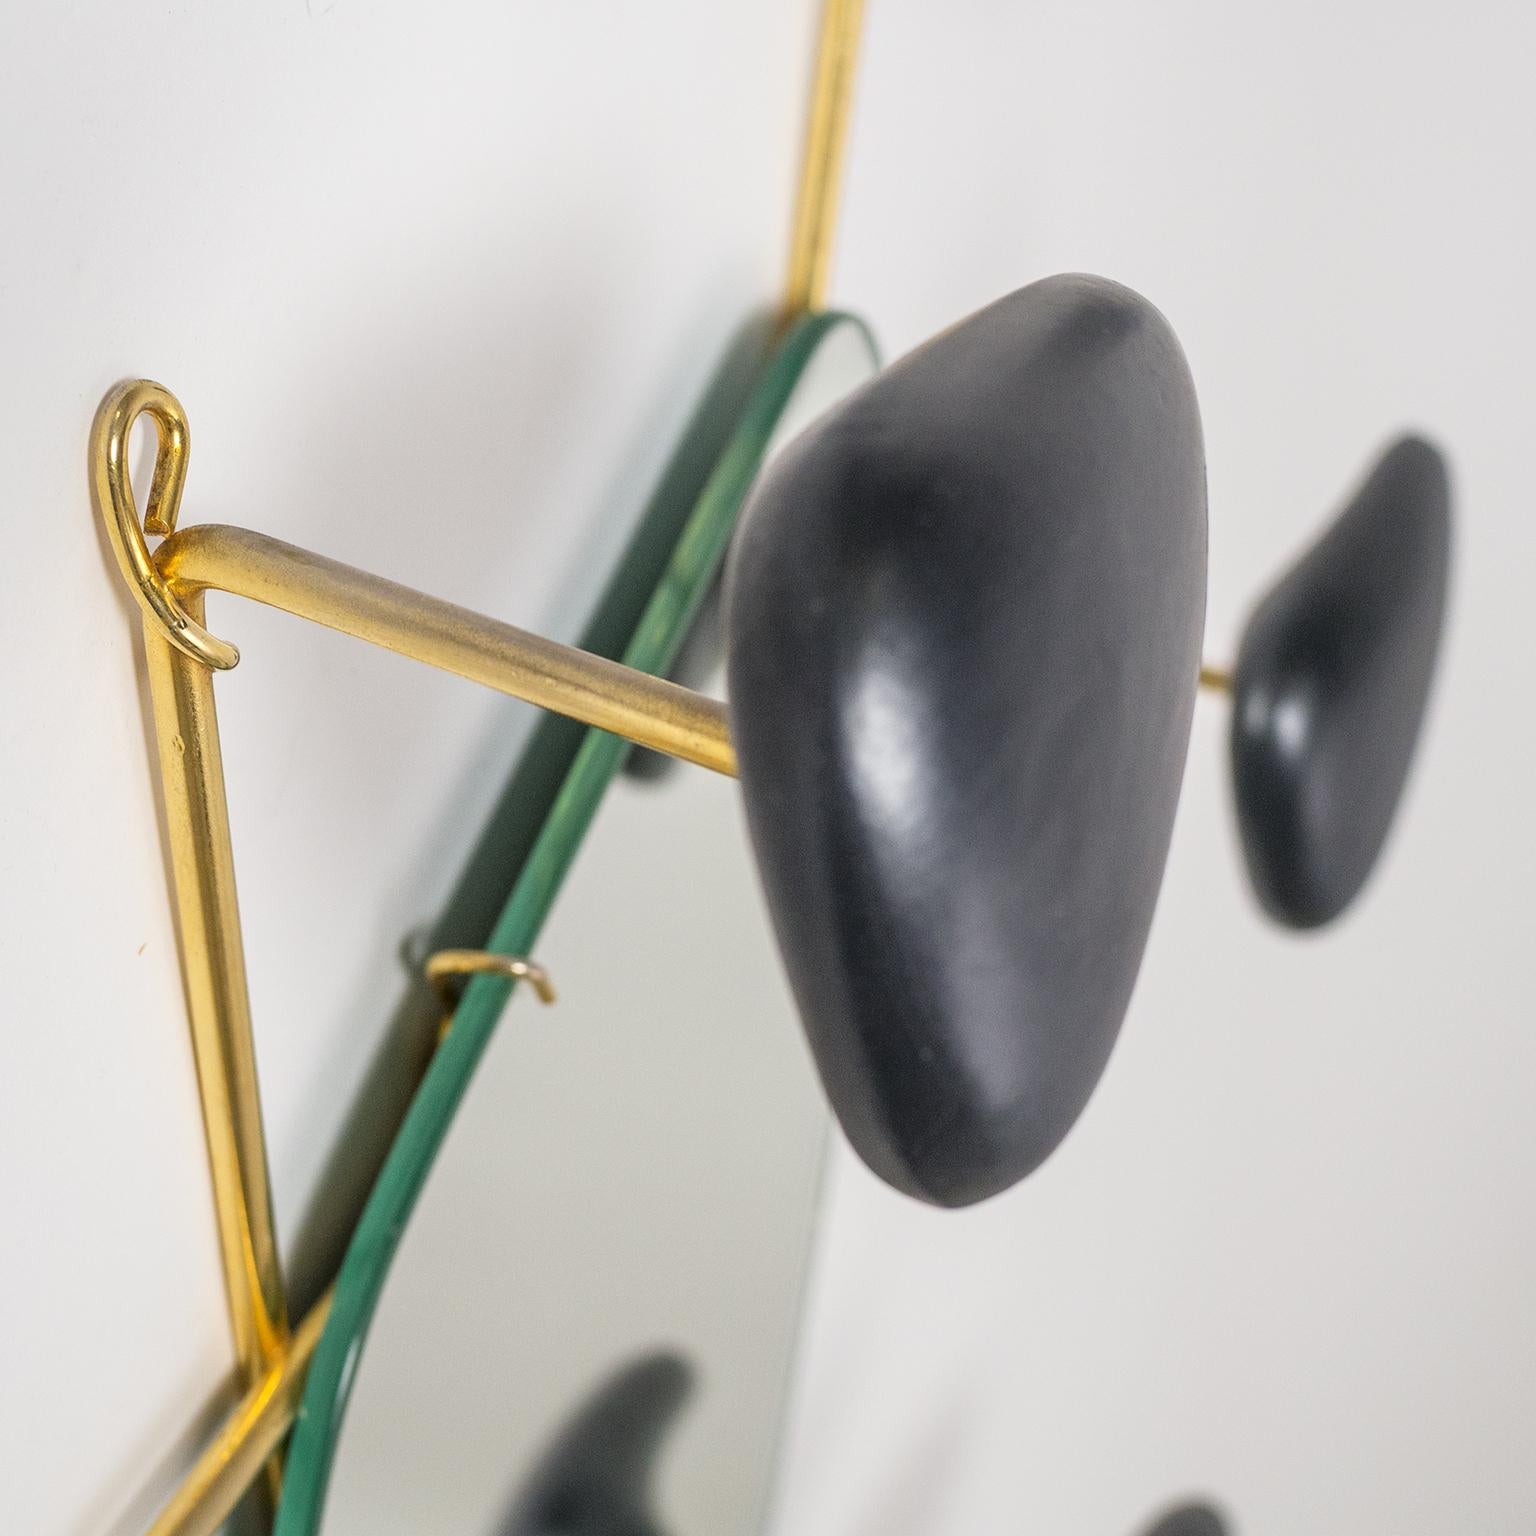 Glazed Georges Jouvé Wall-Mounted Coat Rack with Mirror, 1950s